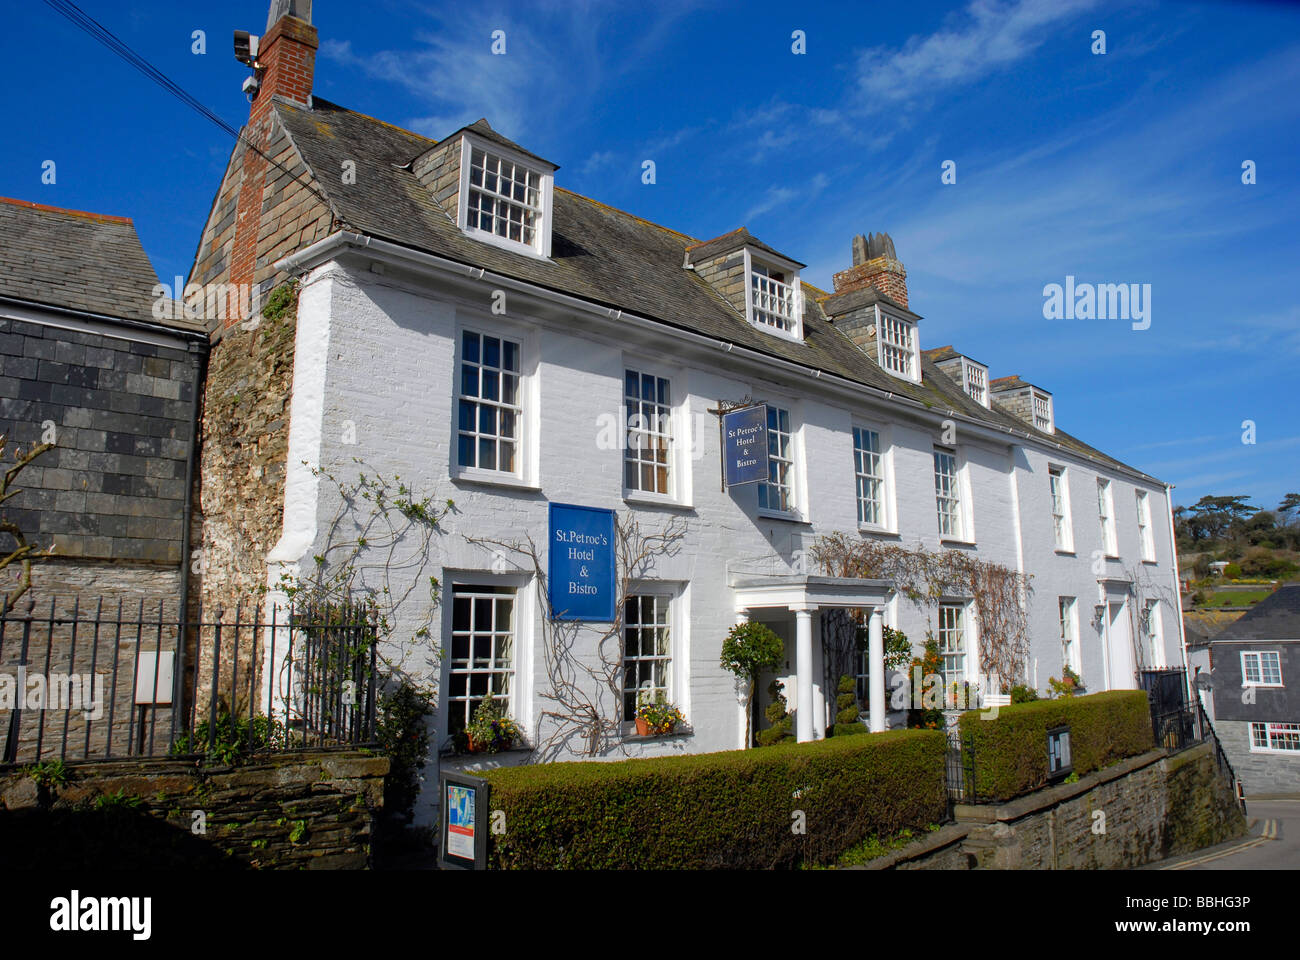 St Petroc's Hotel et bistrot, Padstow, Cornwall, Angleterre, Royaume-Uni Banque D'Images